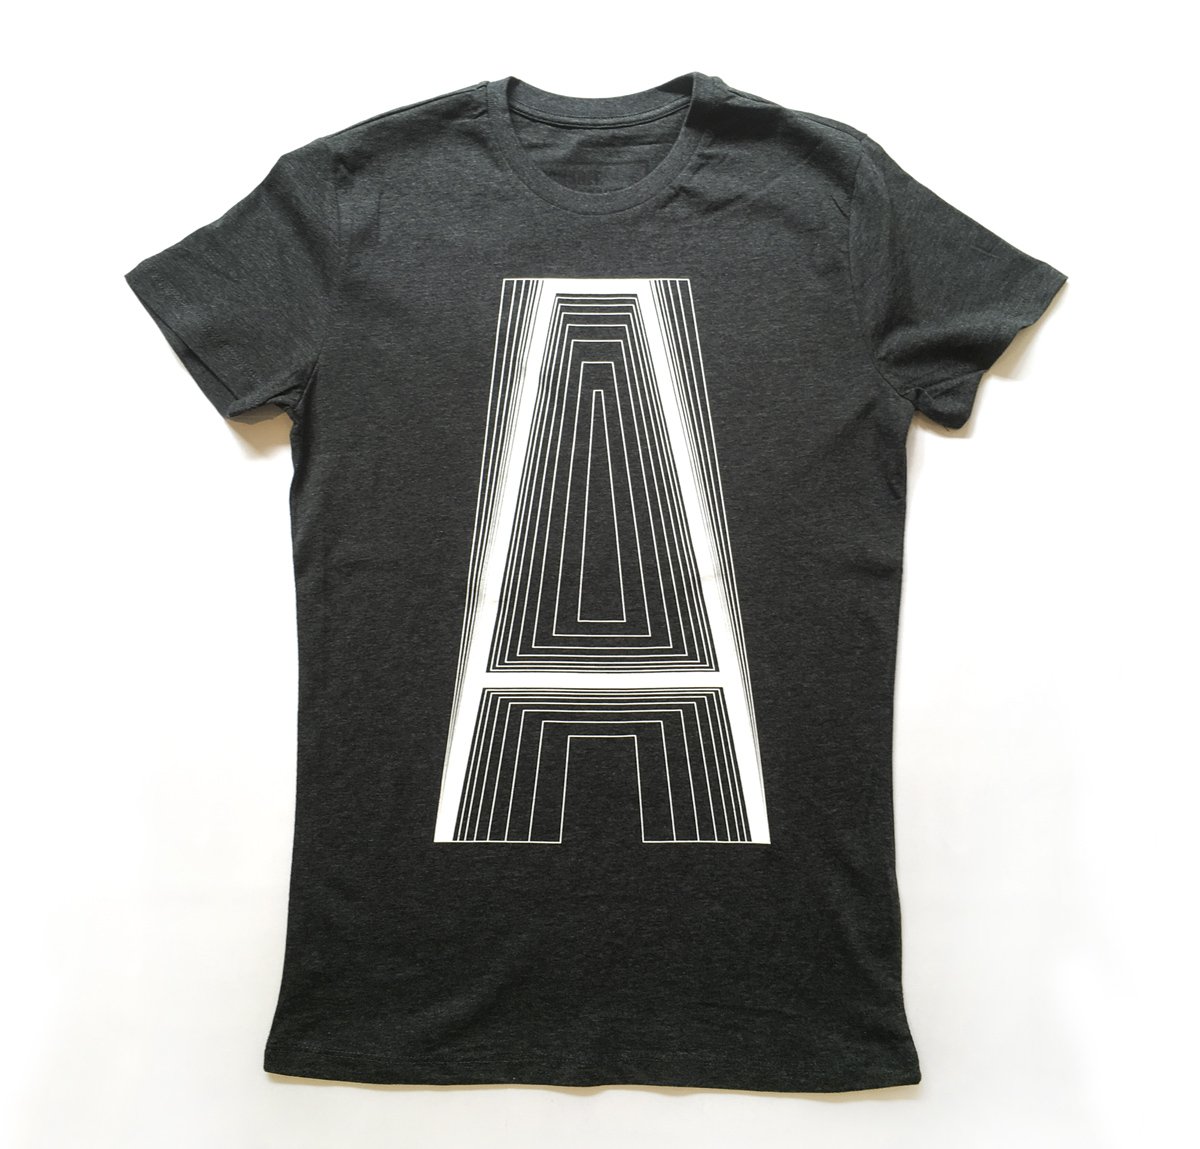 Image of “A” T-Shirt